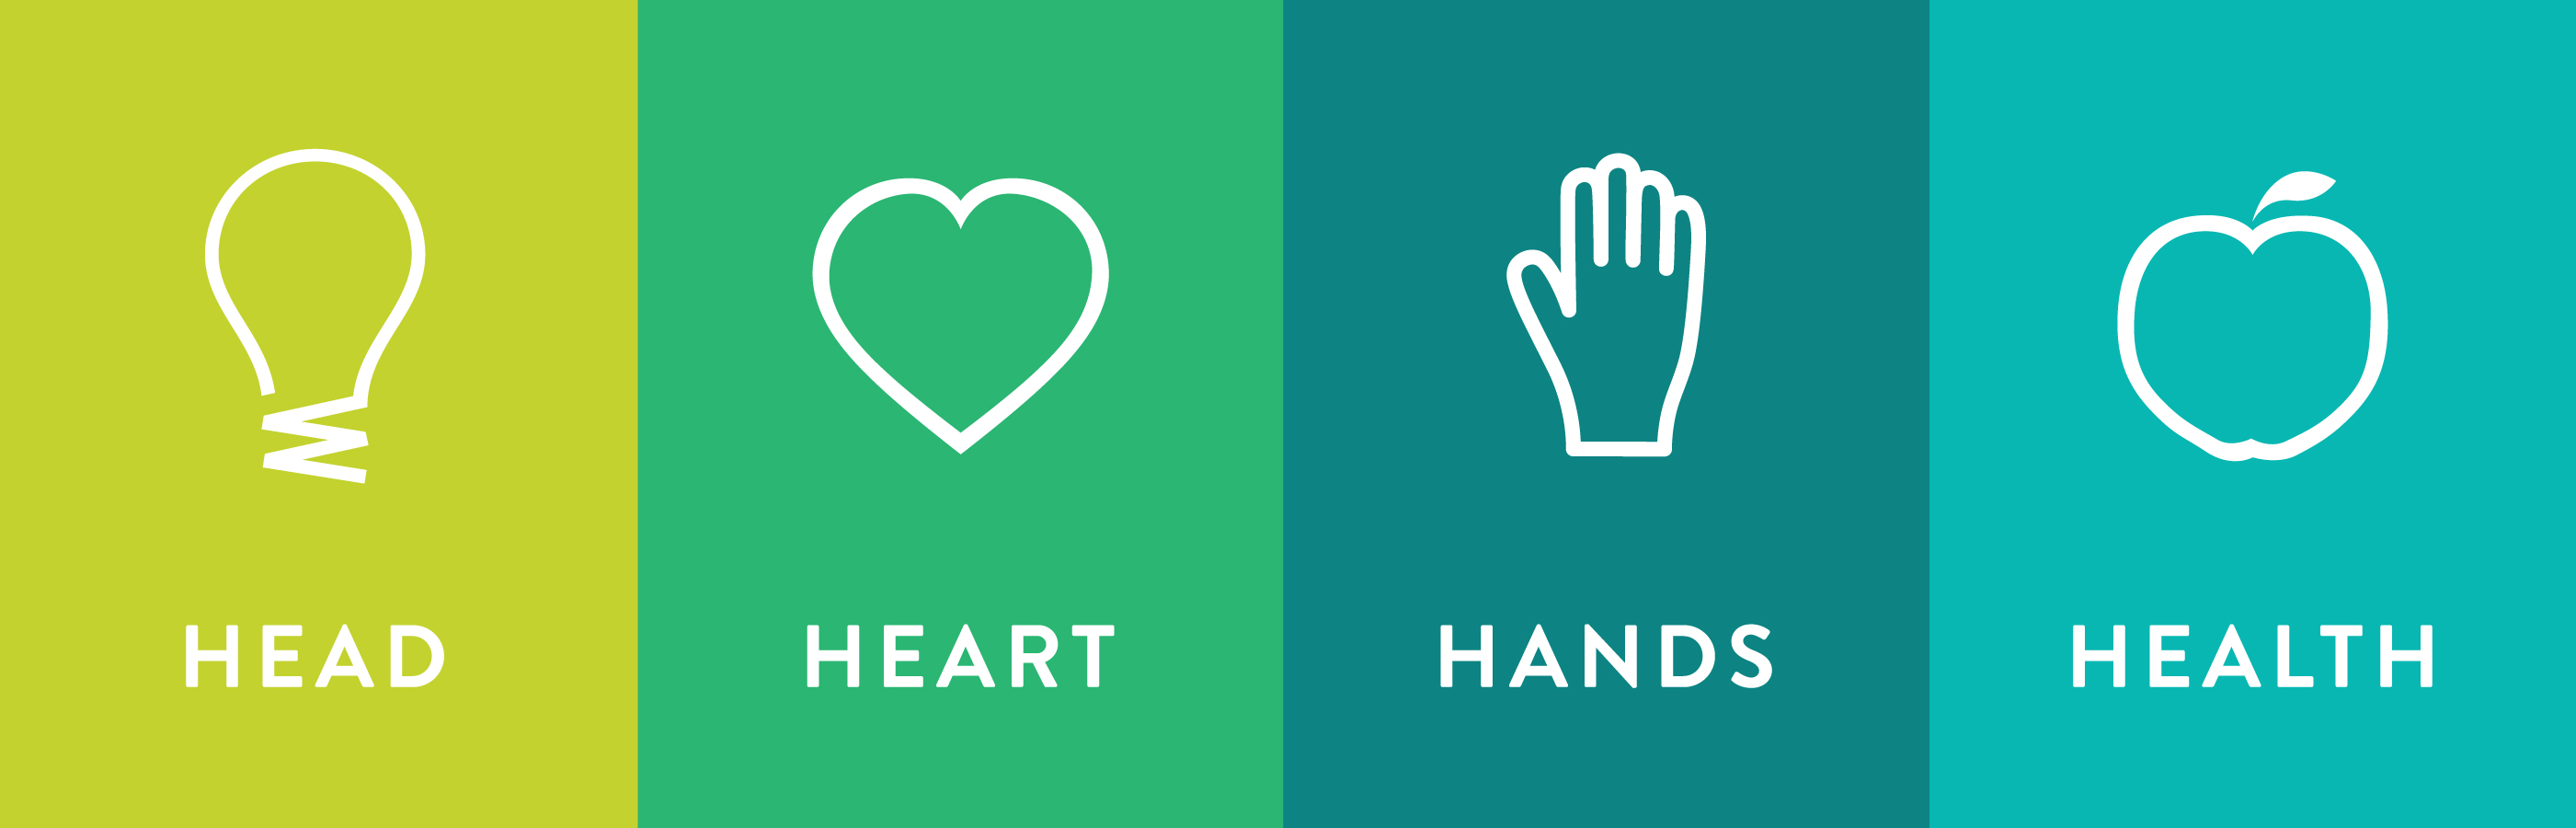 4-H icons, Head represented by a light bulb icon on a lime green background, Heart represented by a heart icon on a kelly green background, Hands represented by ahand icon on a hunter green background, Health represented by an apple icon on a teal blue background.